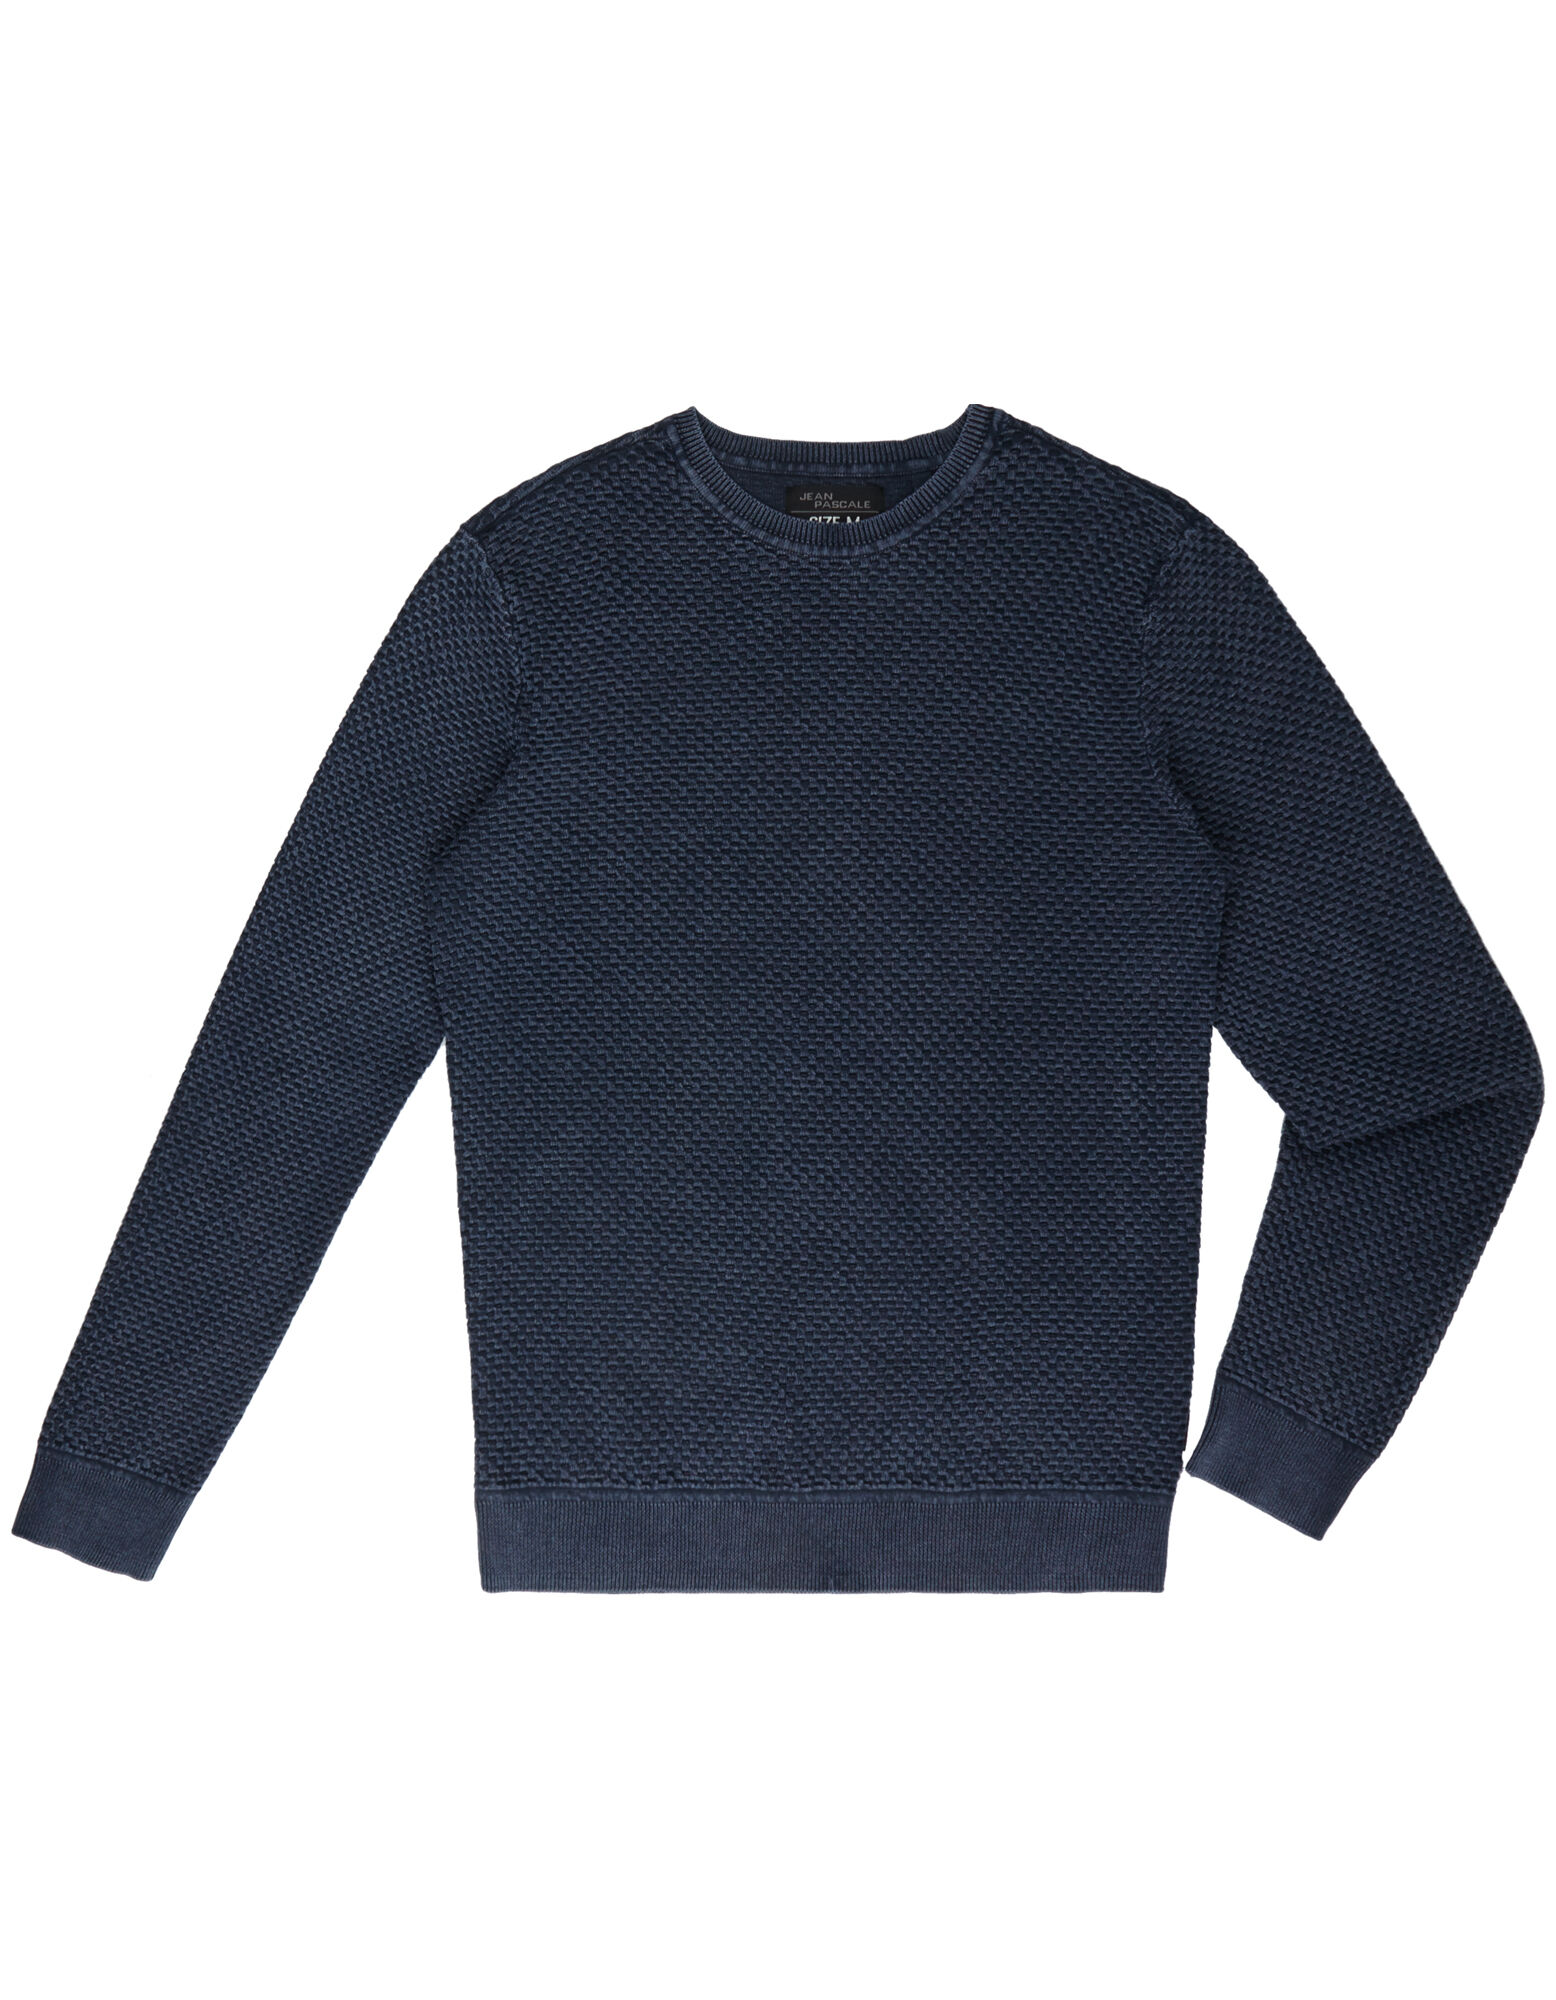 Herren Pullover im Washed Out Look